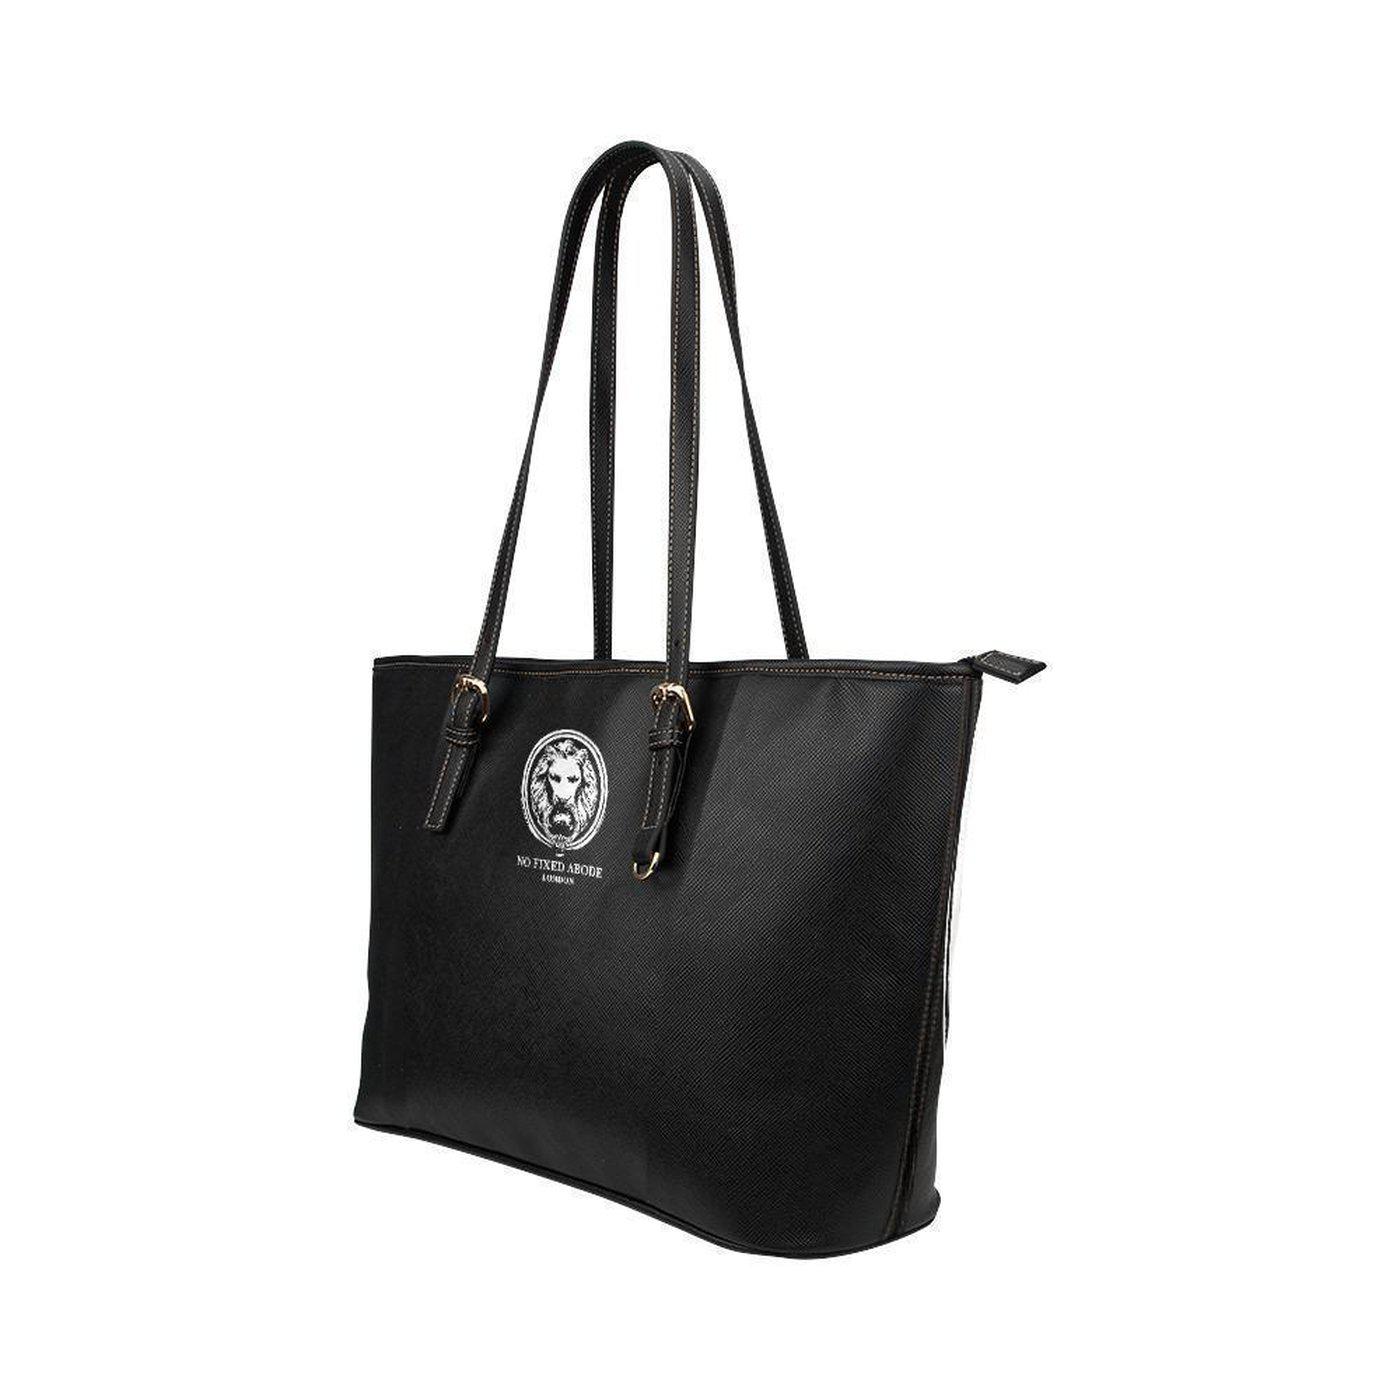 Lion Large Black PU Leather Tote Bag,Bags,NO FIXED ABODE,[uk],[luxury_streetwear],[free_shipping]